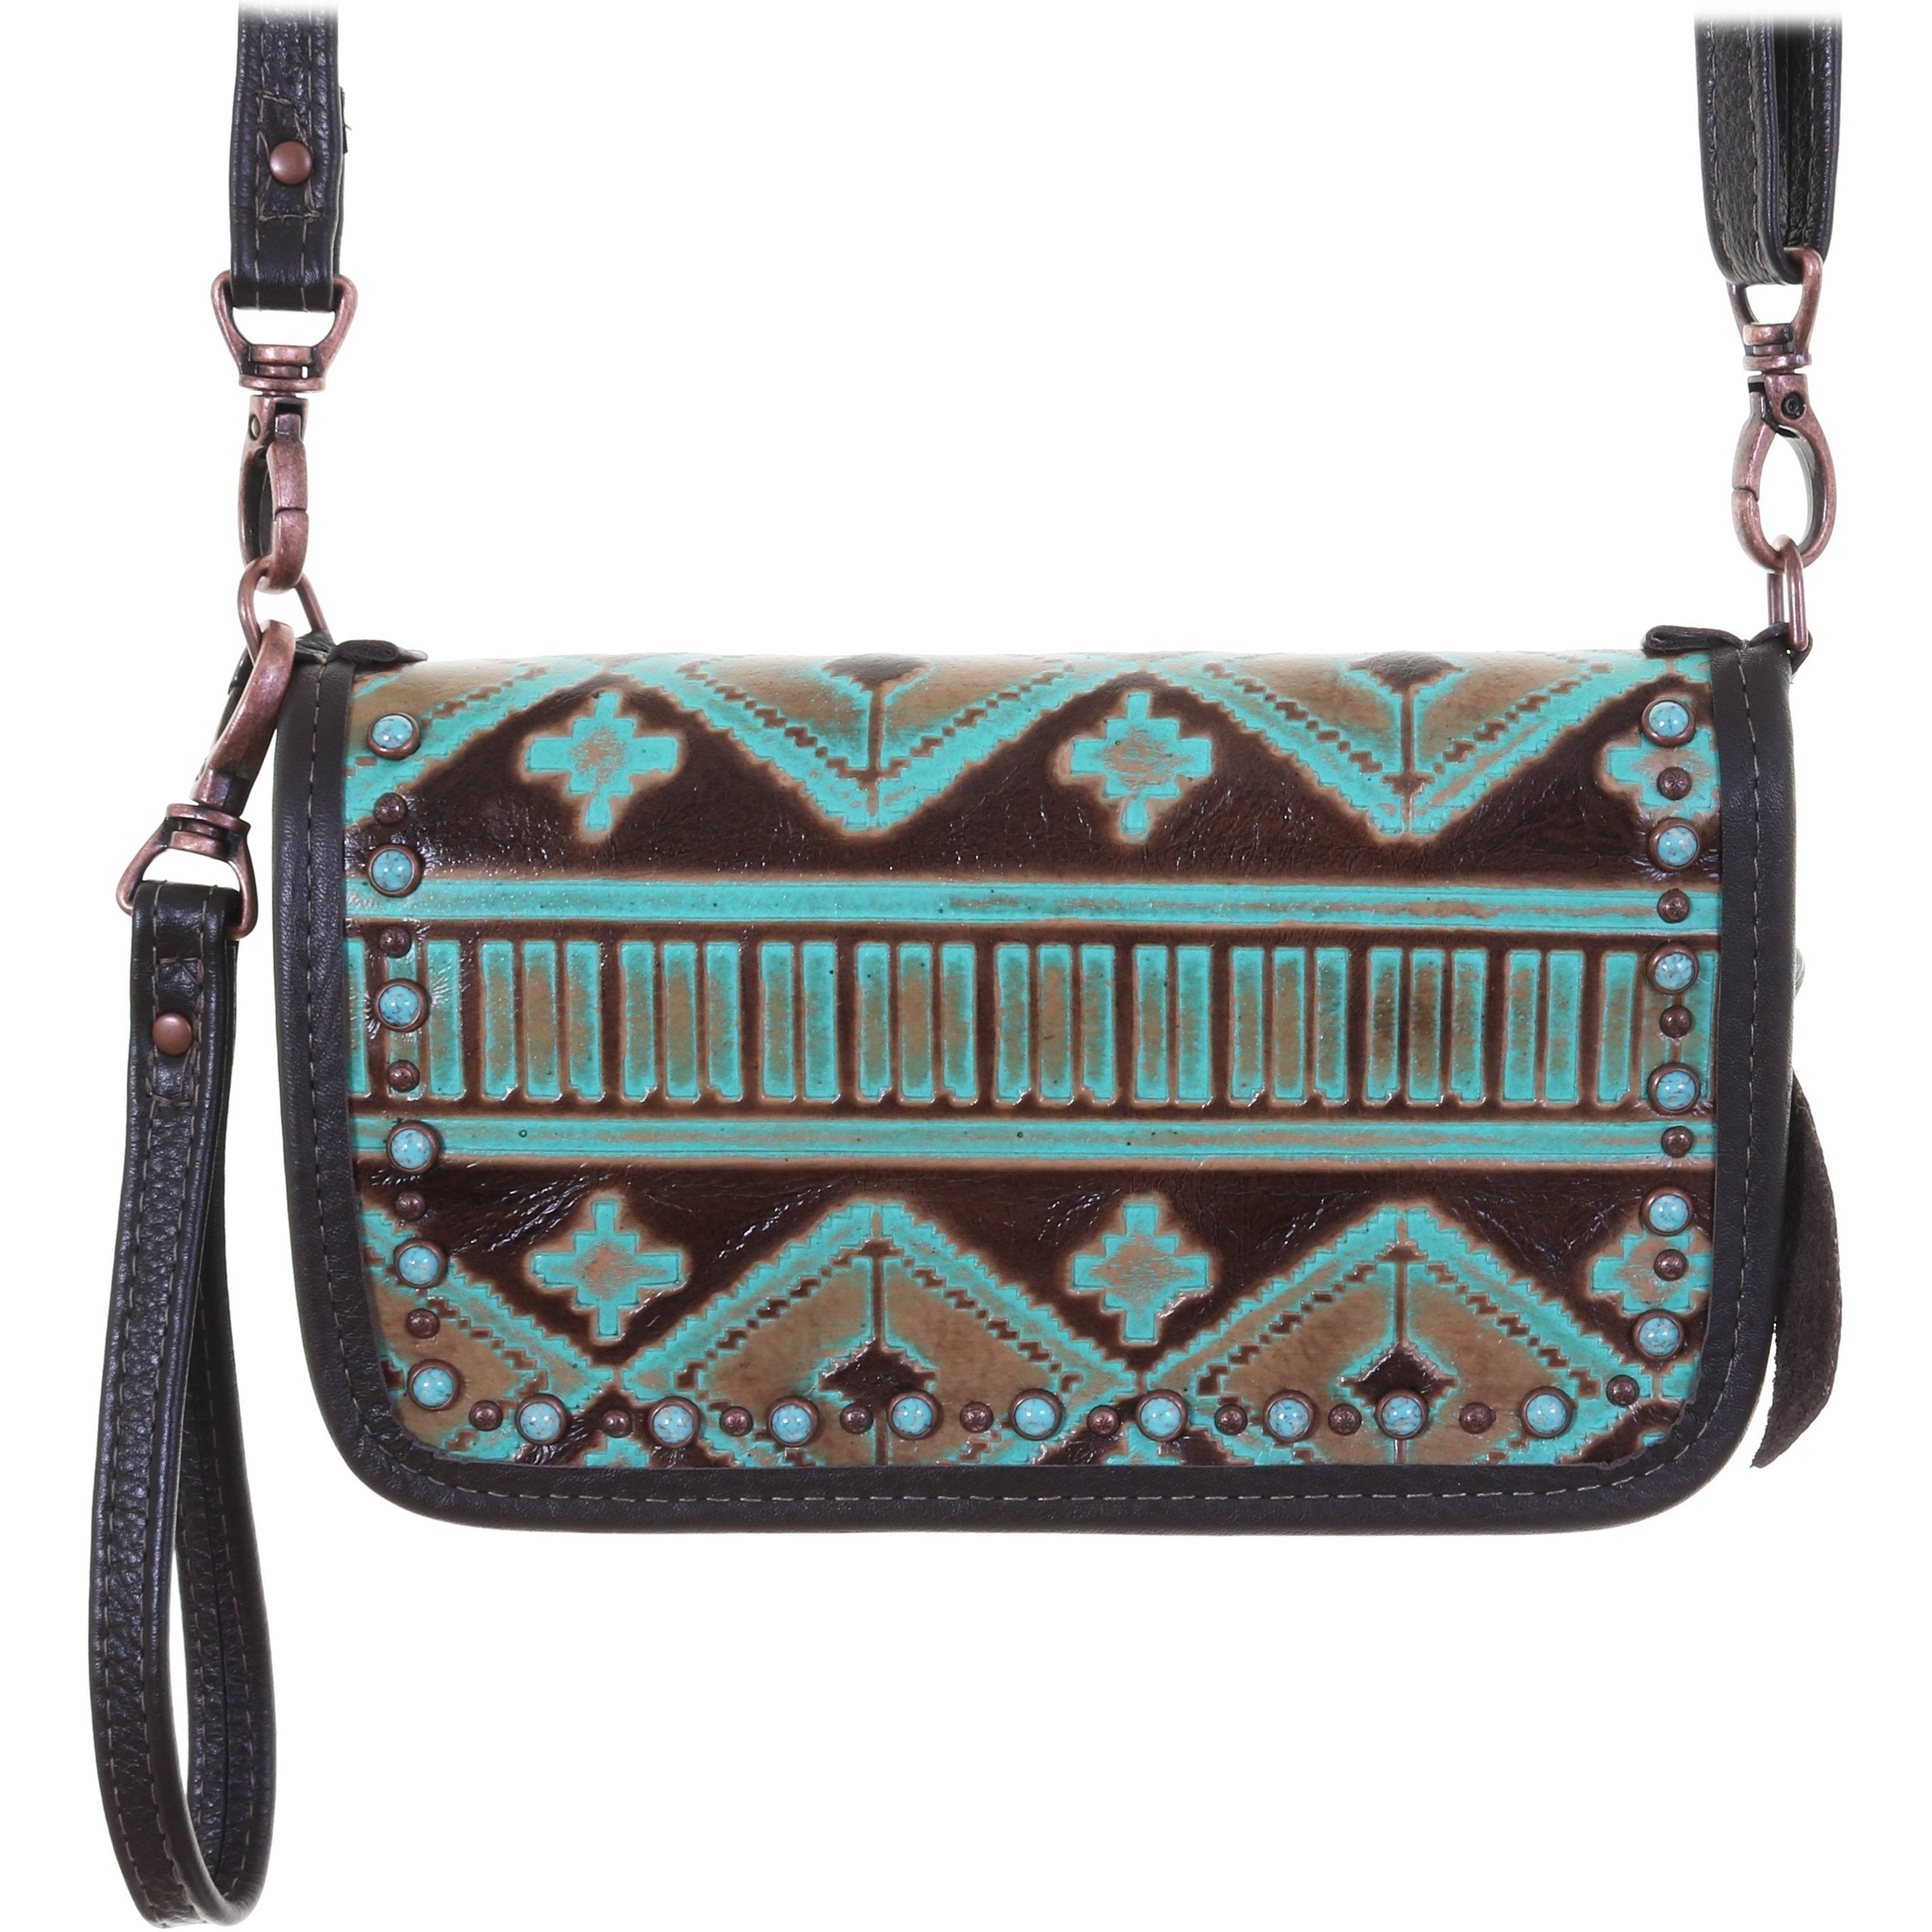 CO154 - Navajo Turquoise and Brown Clutch Organizer - Double J Saddlery